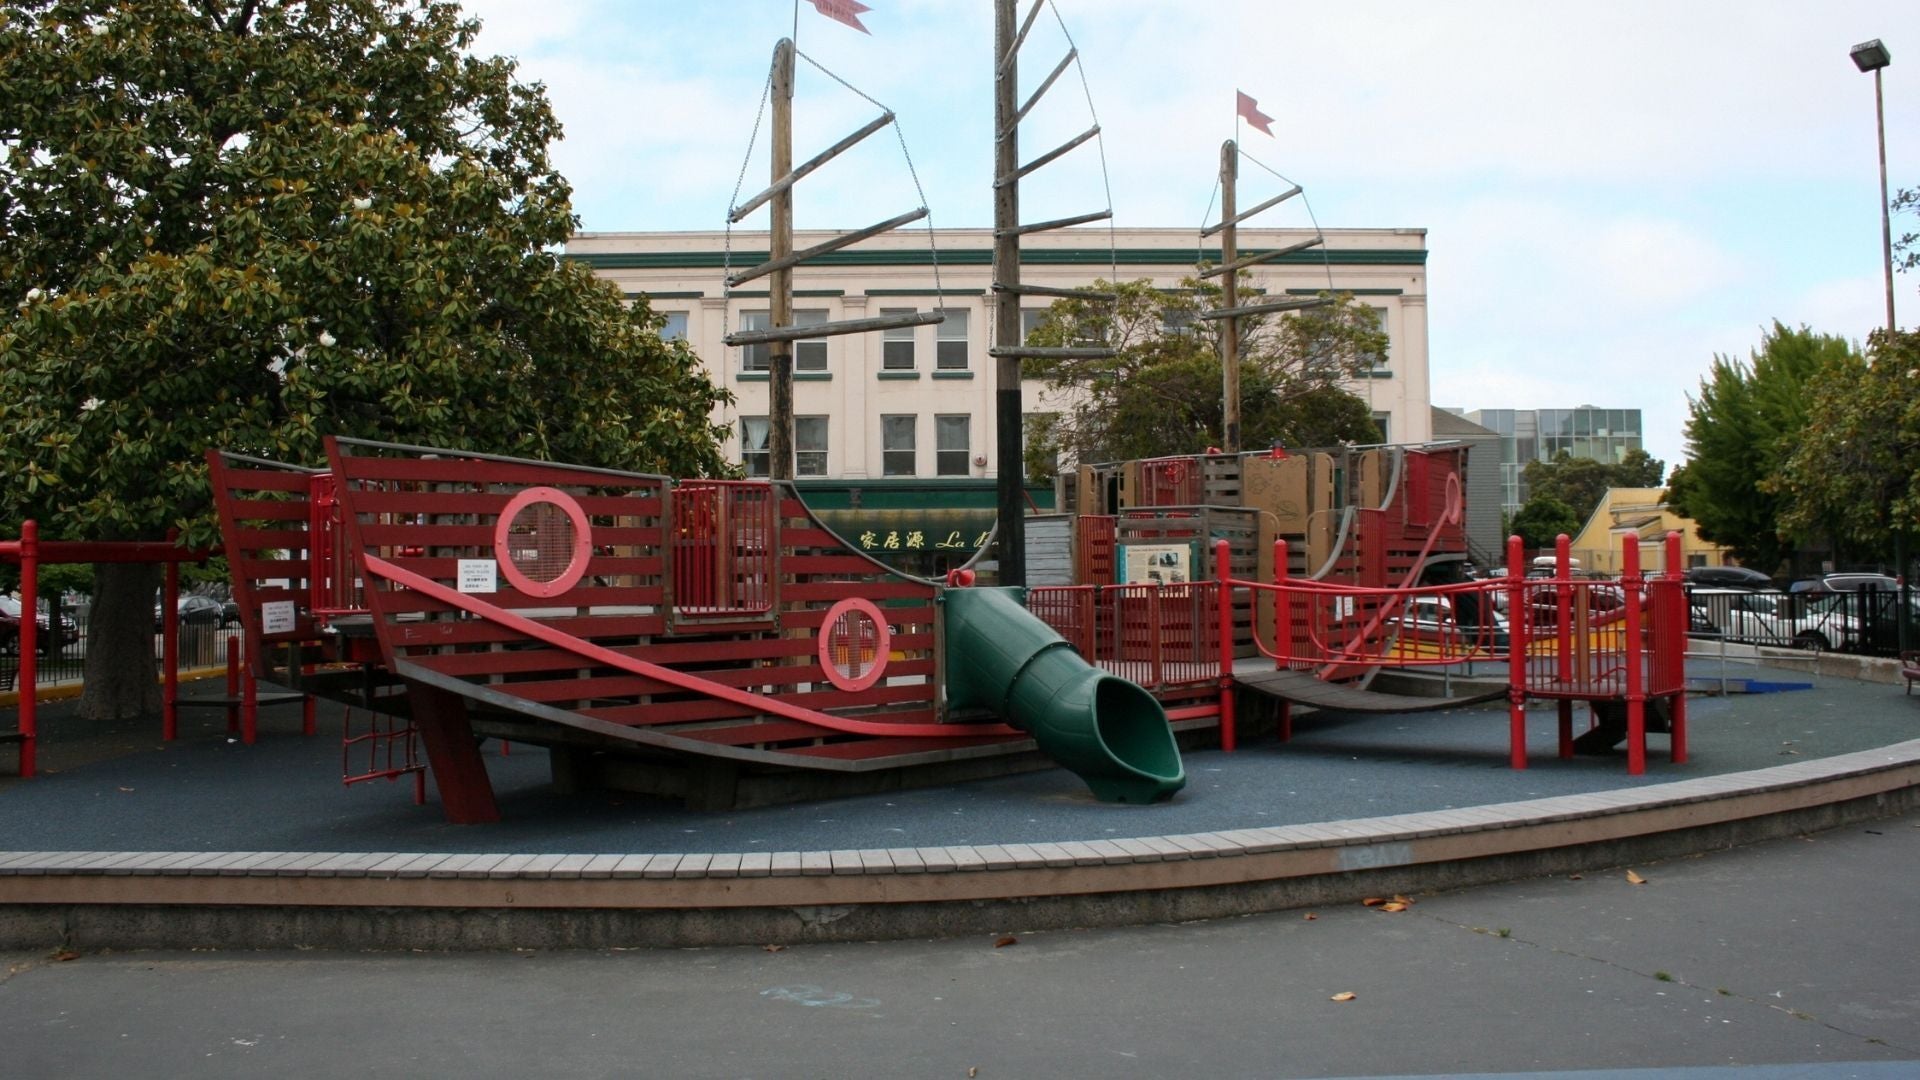 Lincoln Square Recreation Play Structure in Oakland